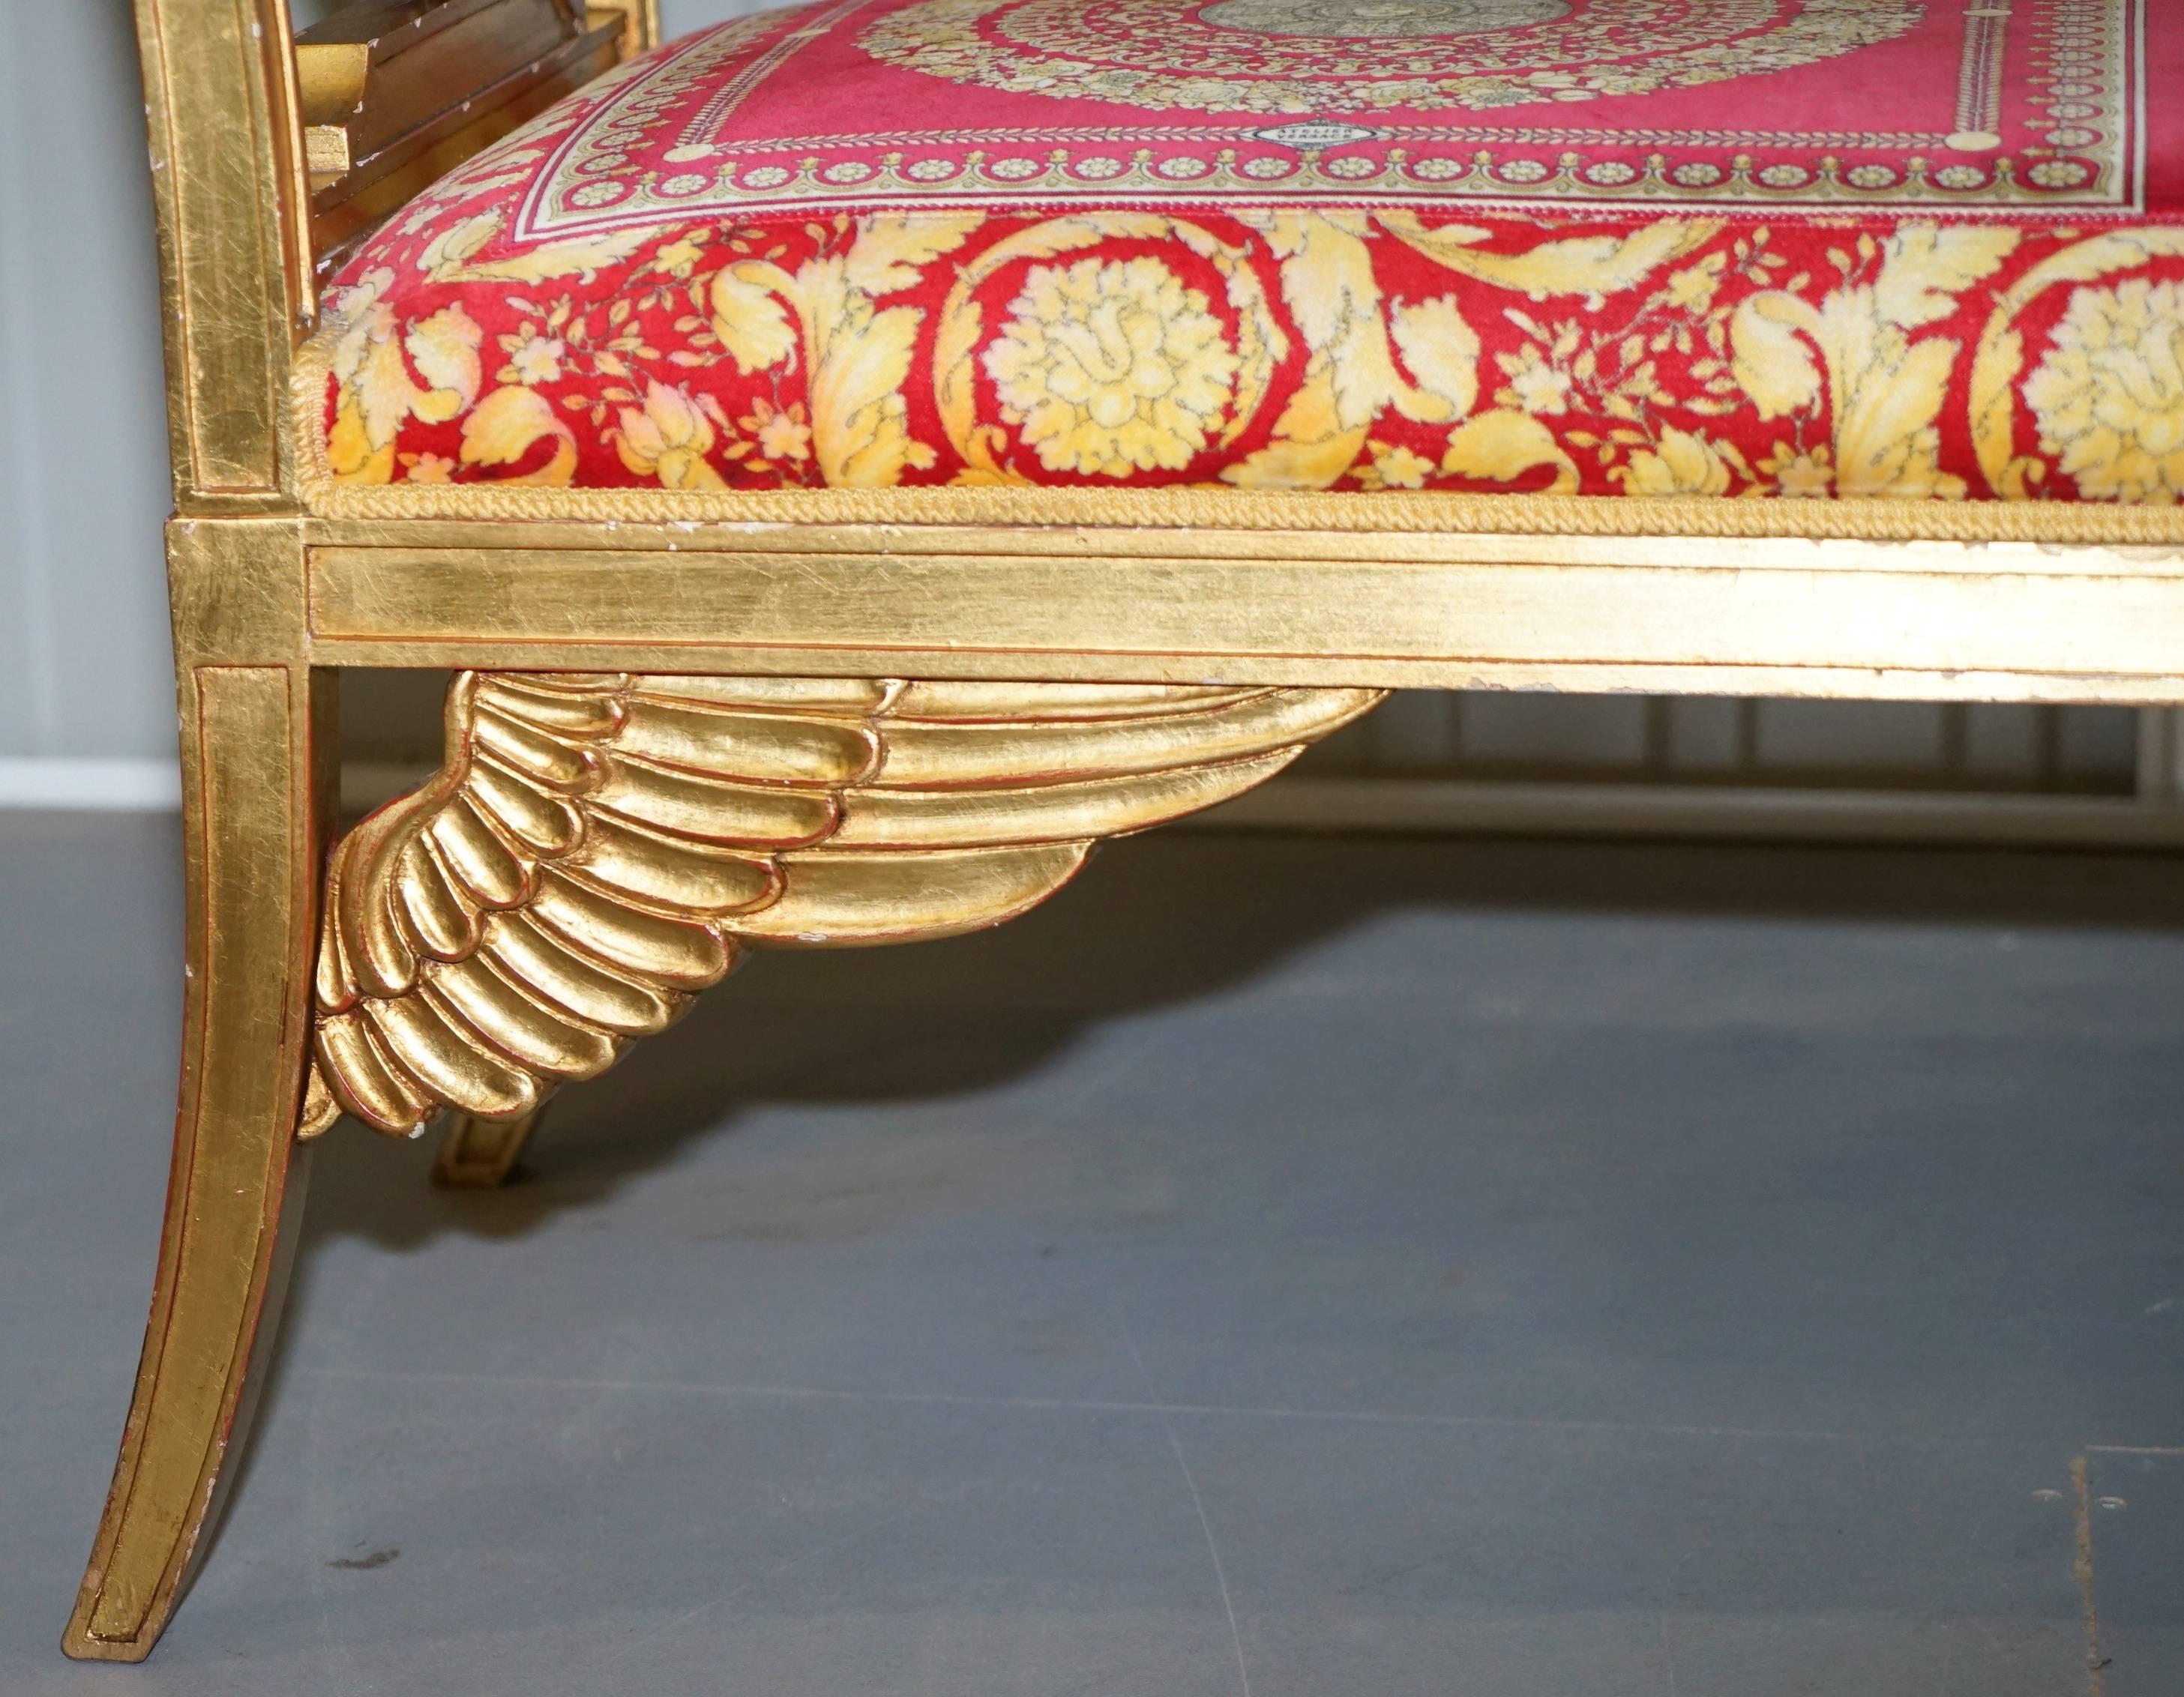 Velvet Versace Gold Leaf Painted French Window Seat Original Upholstery